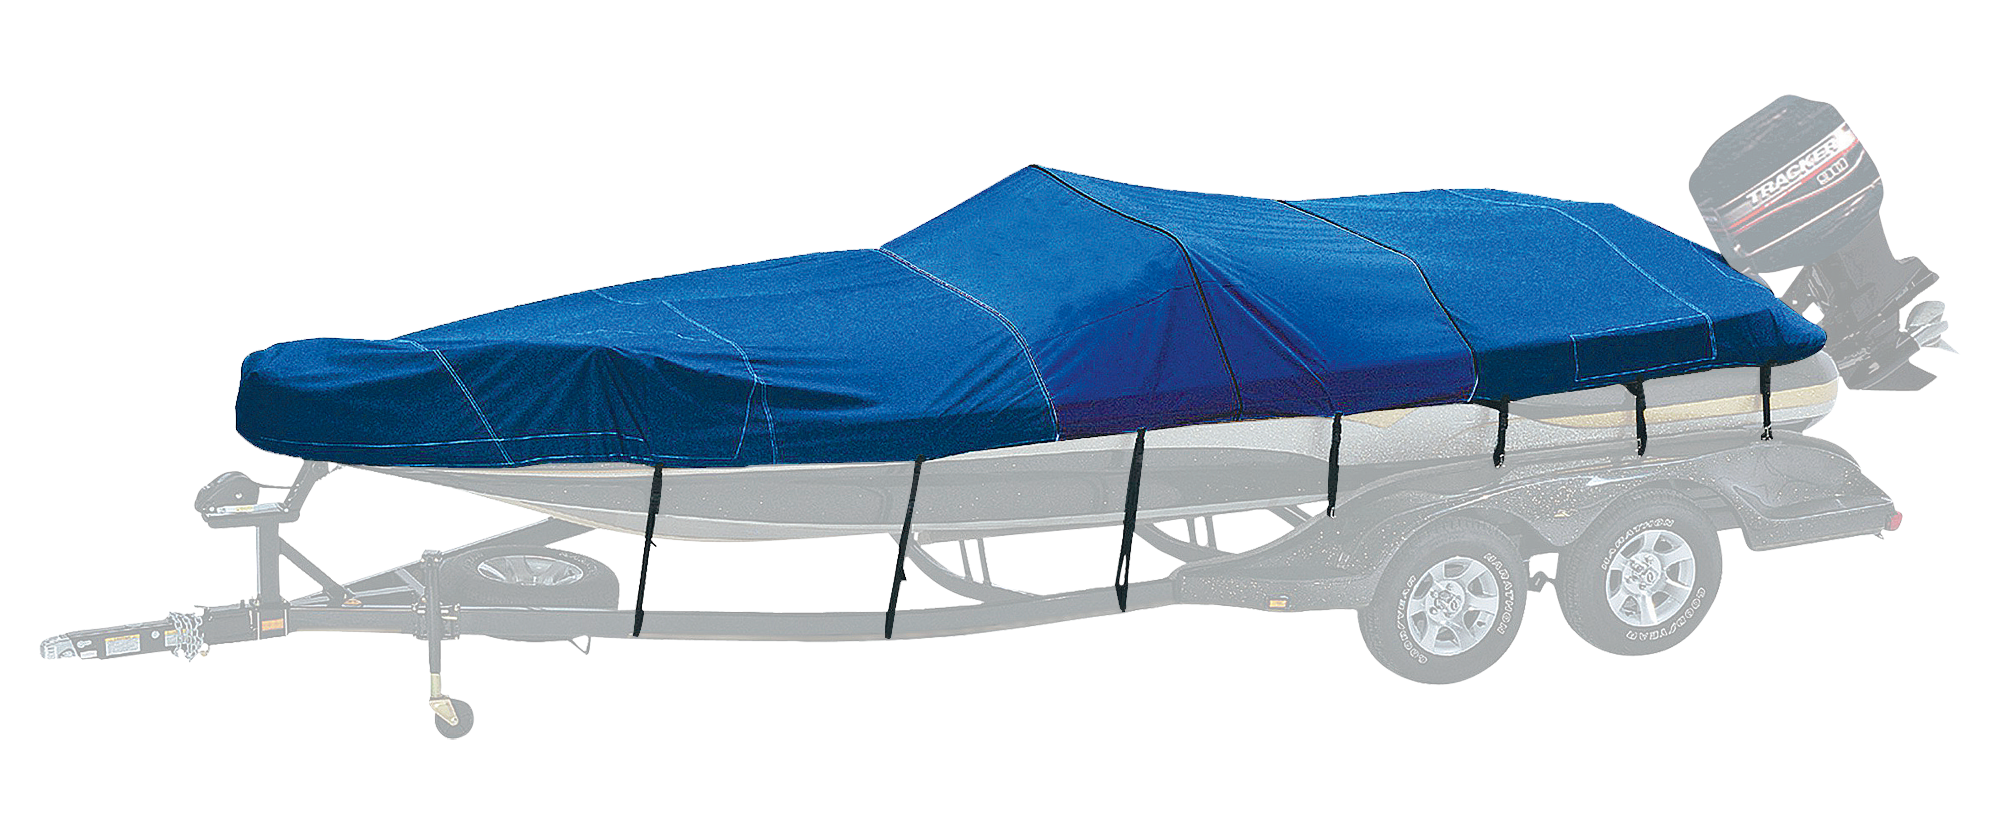 Bass Pro Shops Exact Fit Custom Boat Cover by Westland for TRACKER Angler Models